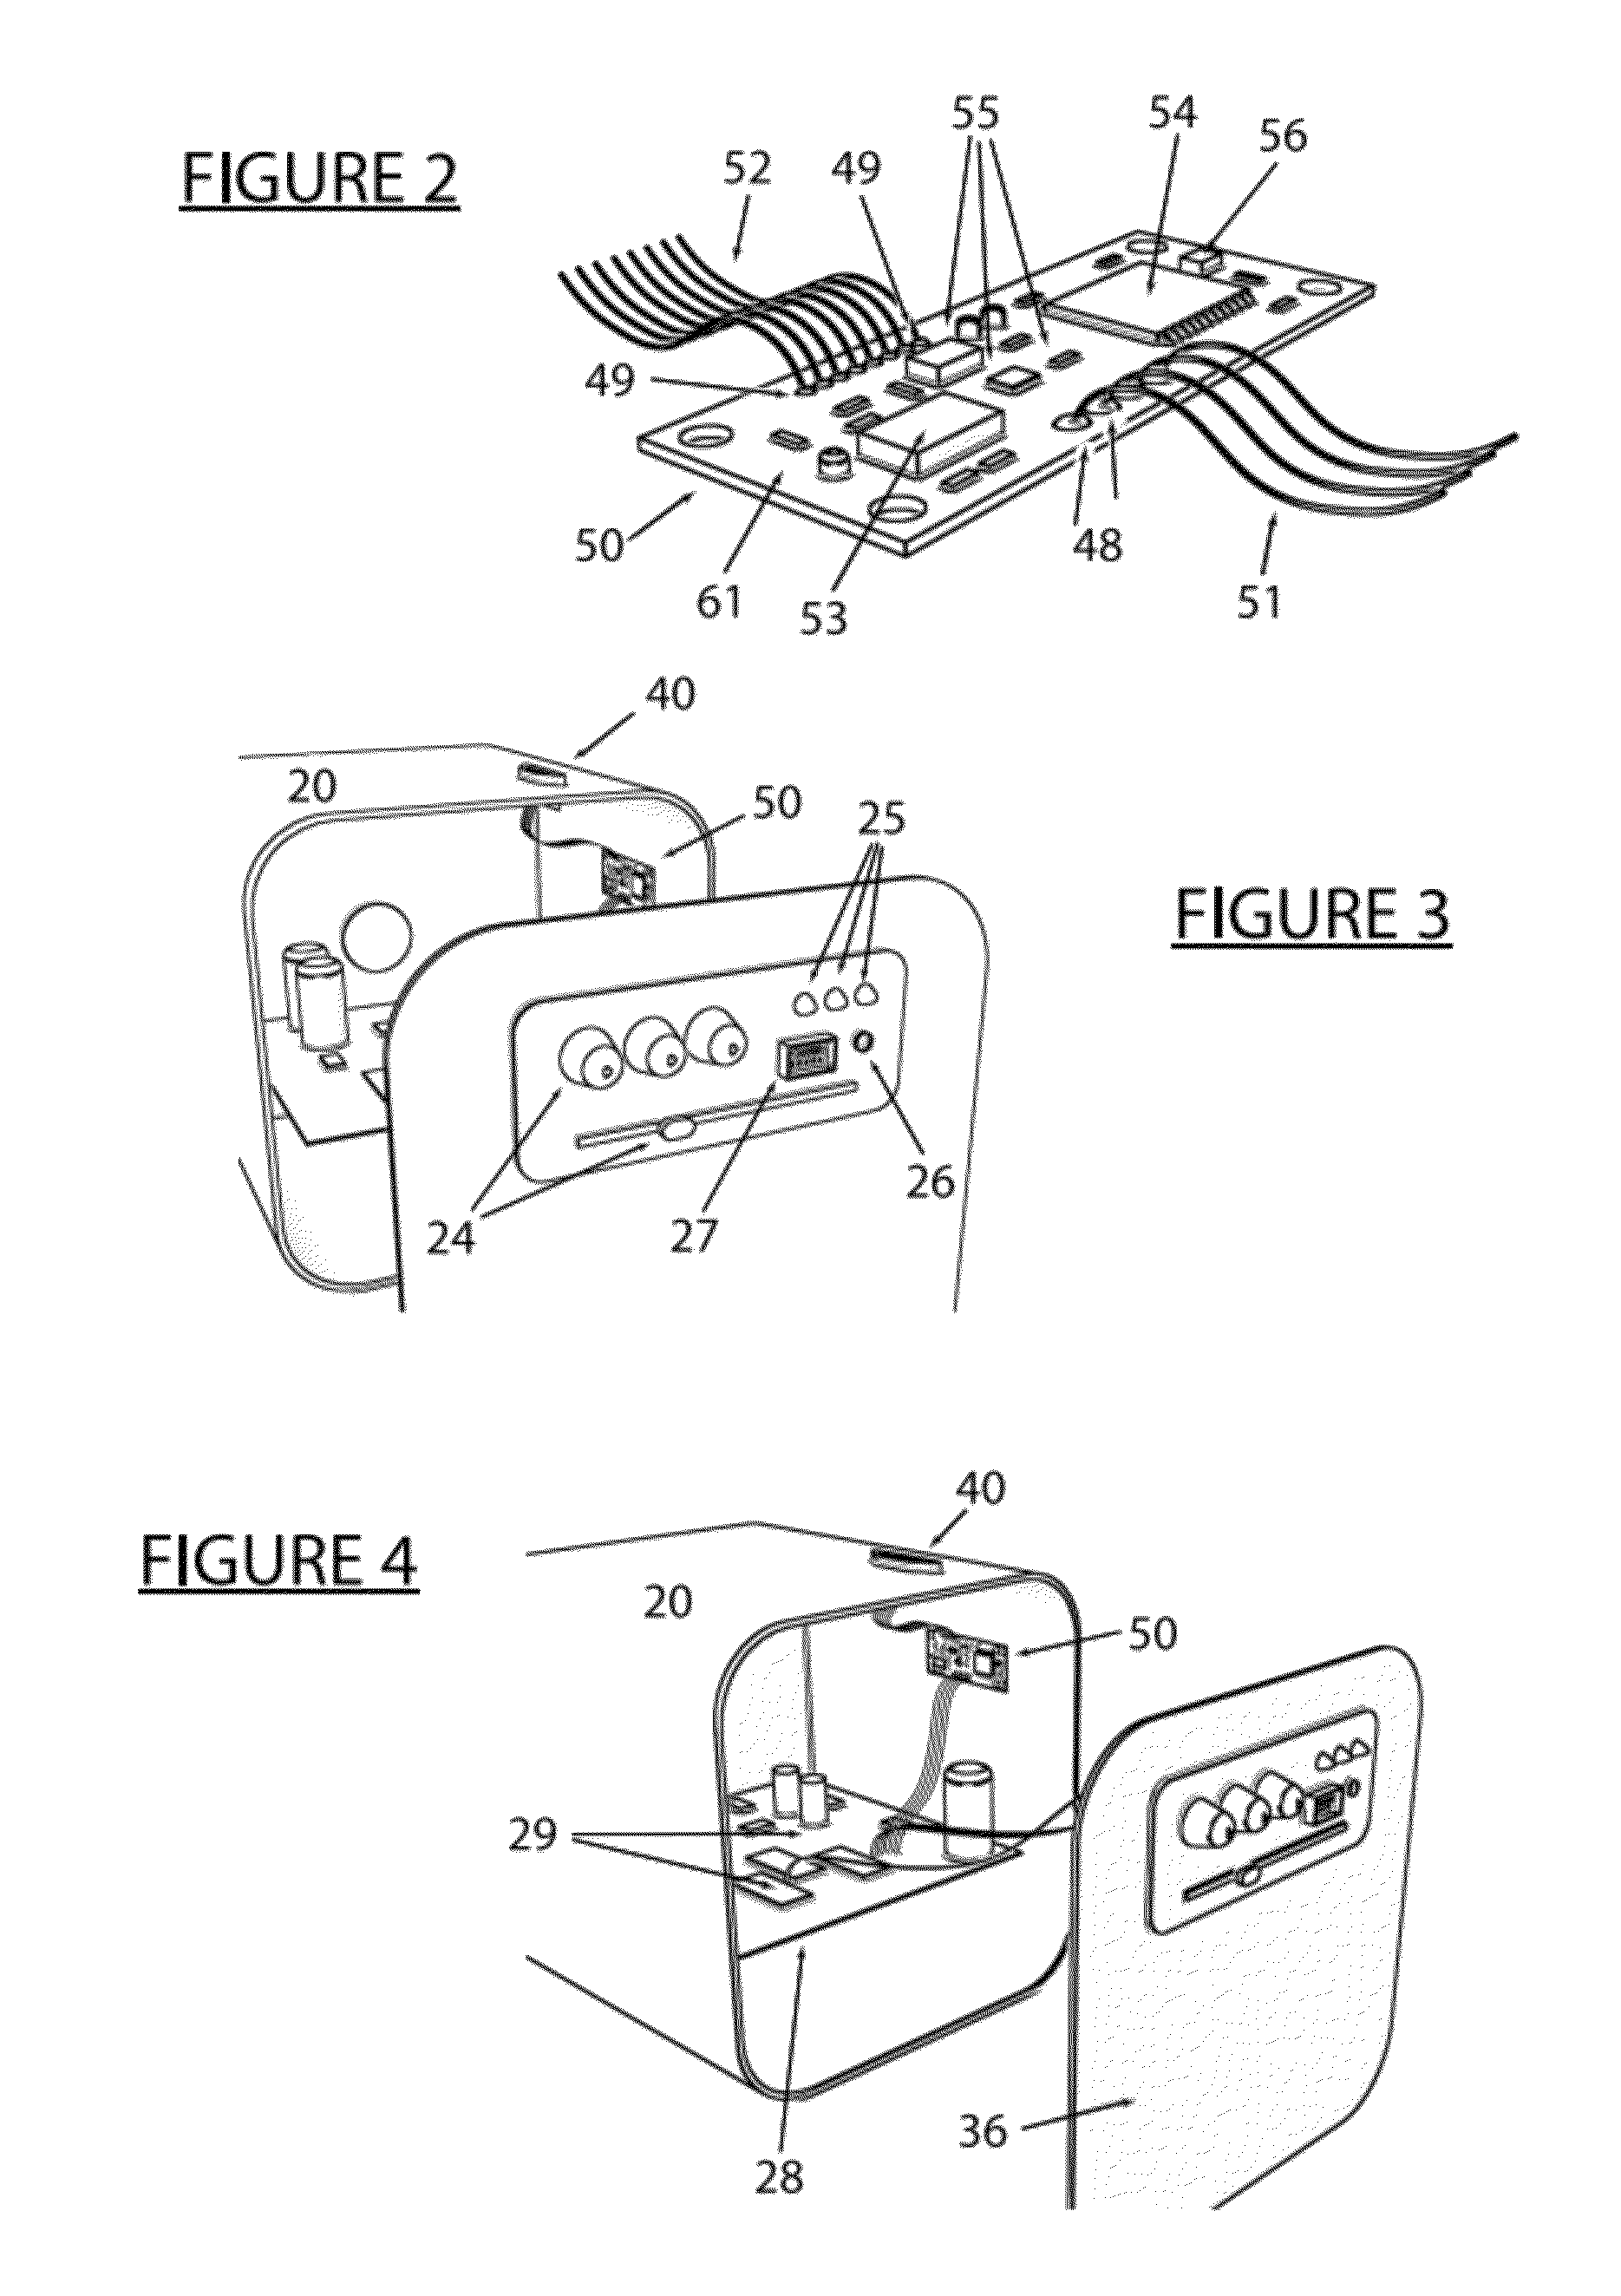 Photographic control system, devices and method